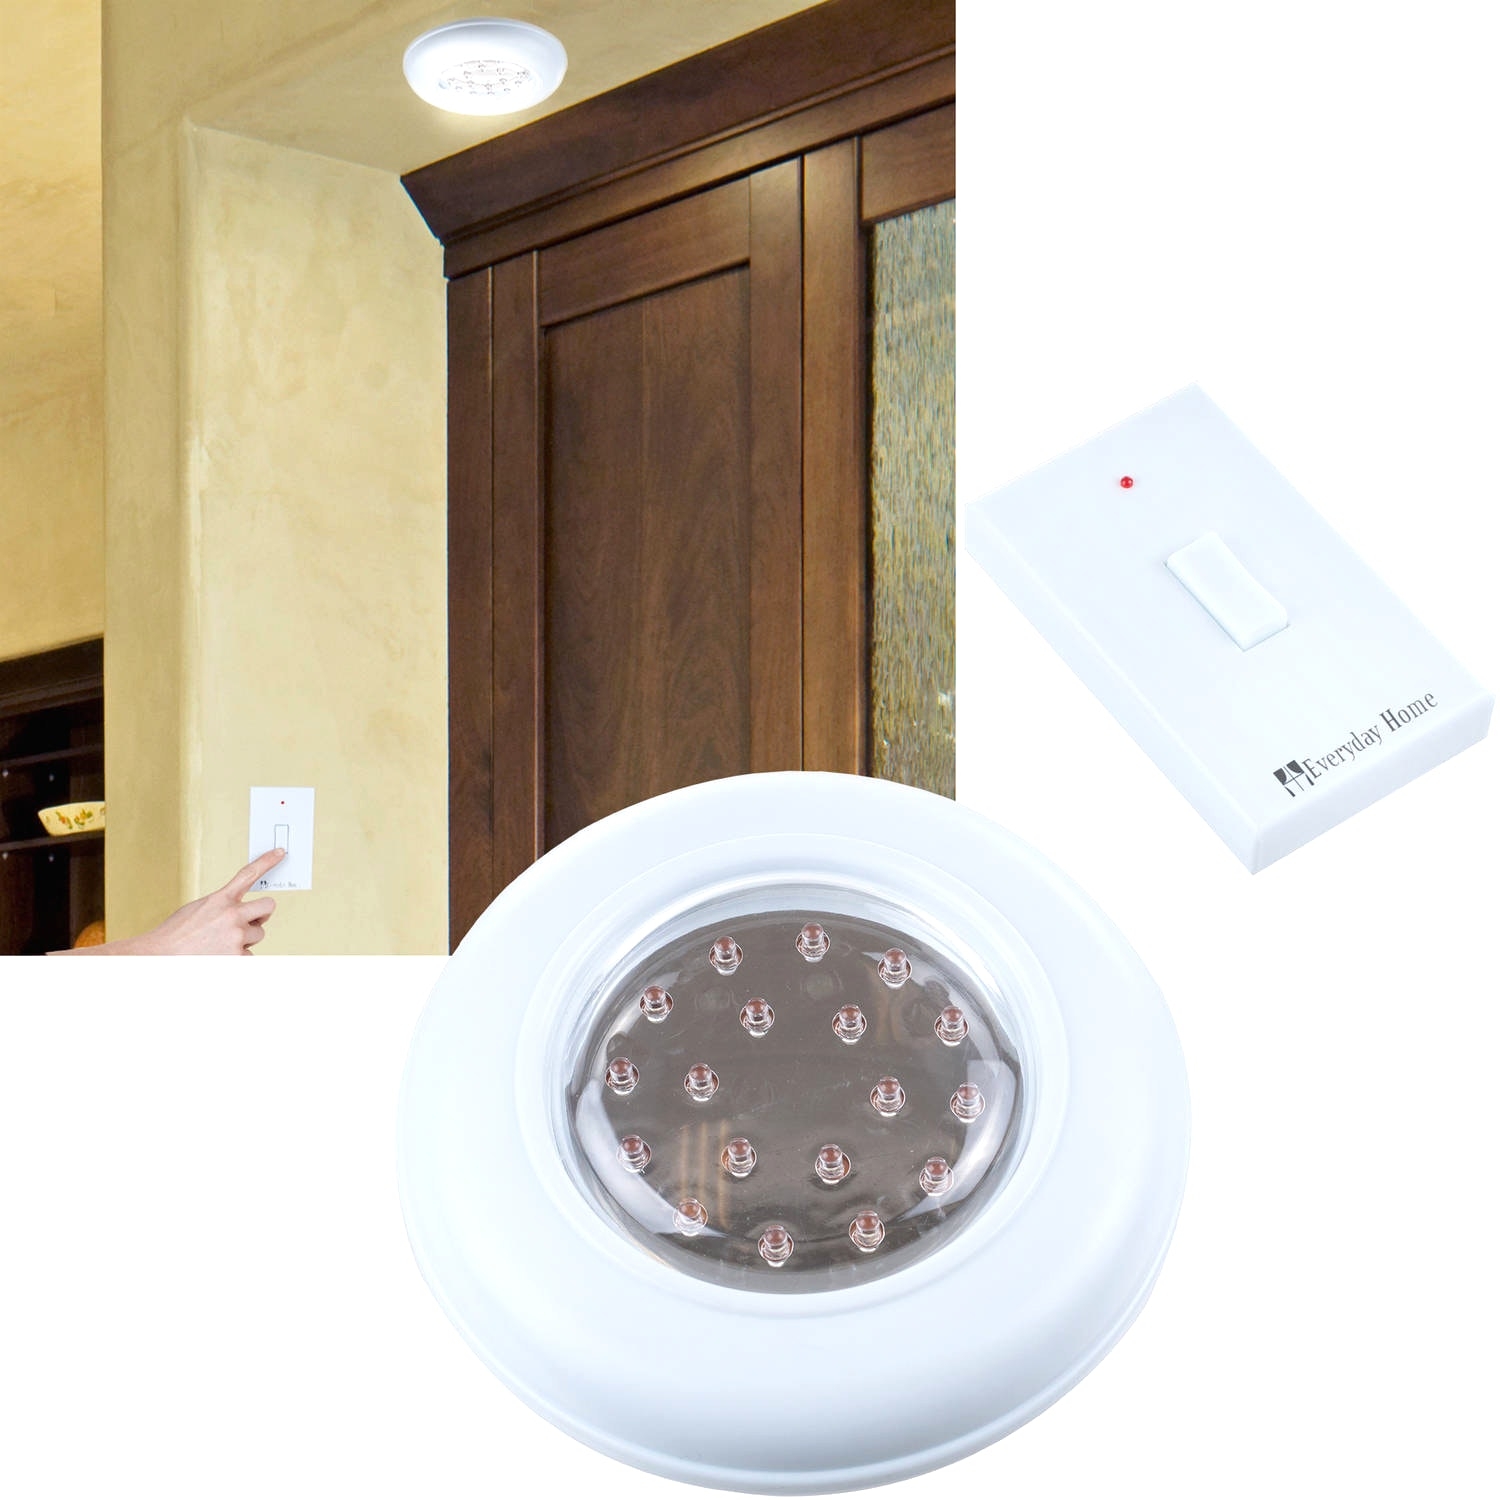 Remote Controlled Ceiling Light Switch1500 X 1500